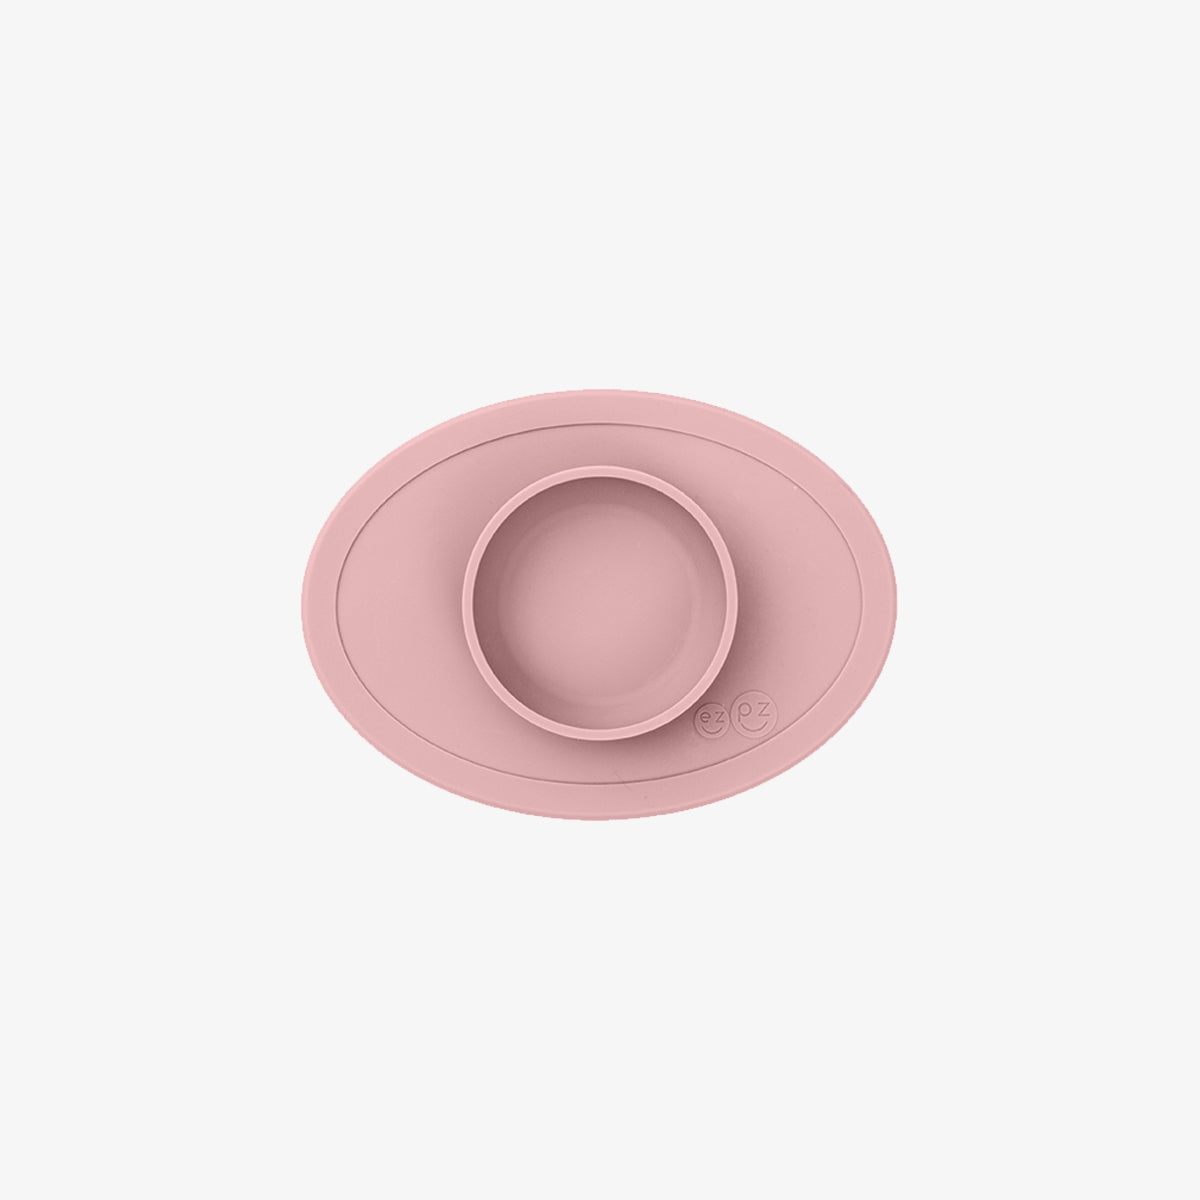 The Tiny Bowl in Blush by ezpz / Silicone Bowl for Babies that Fits on High Chairs